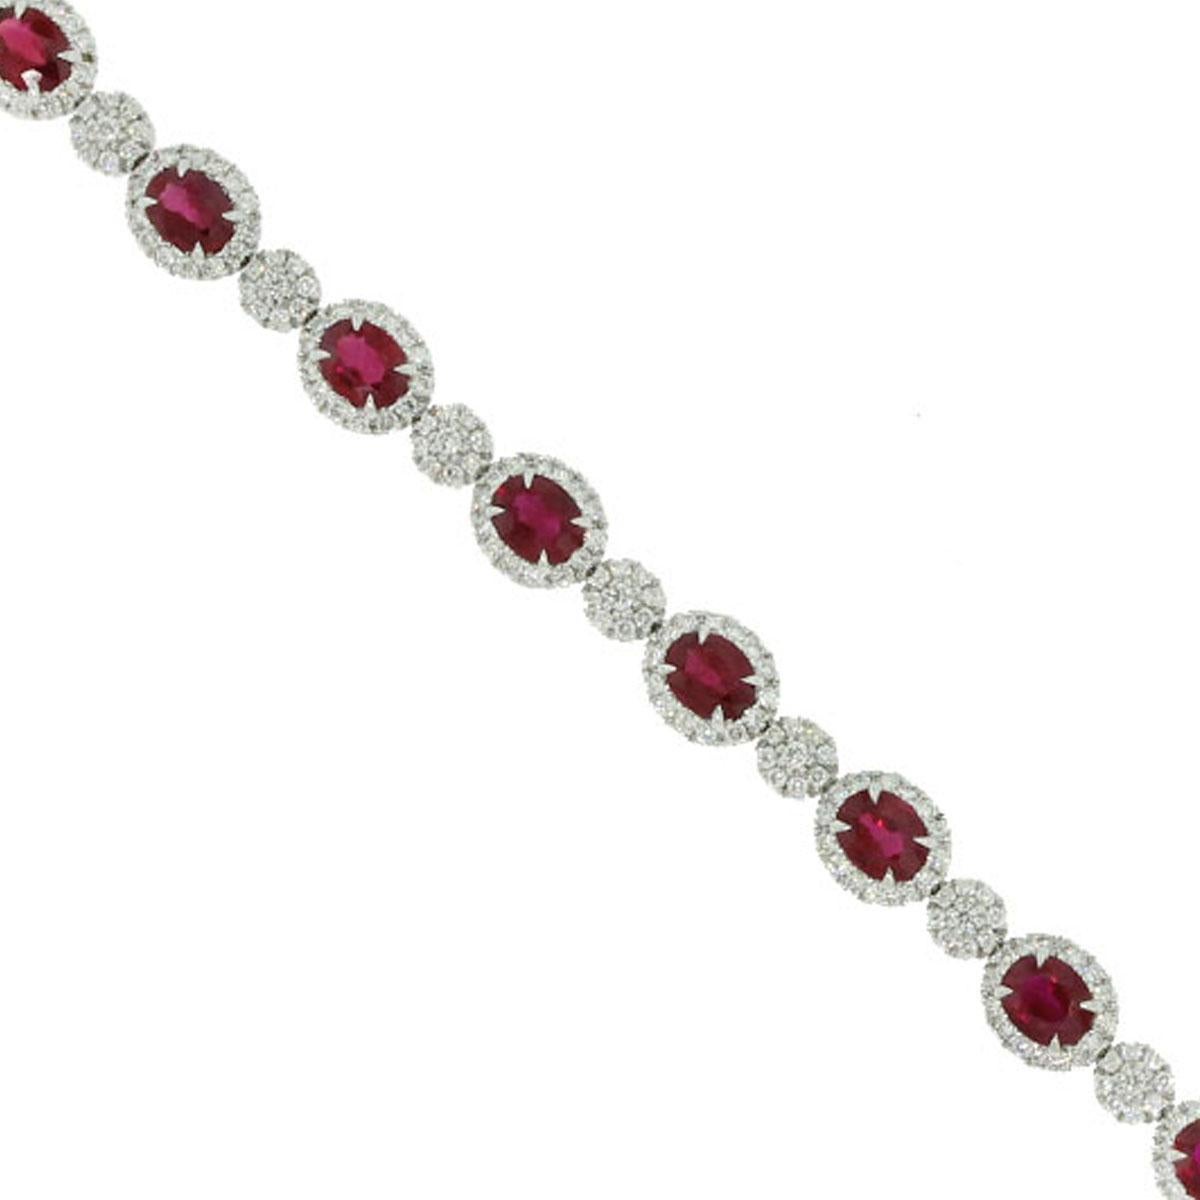 Material-18k White Gold
Gemstone Details-Approx. 6.25ct Oval Cut Ruby Gemstones.
Diamond Details-Approx. 2.04ct Round cut diamonds. Diamonds are G/H in color and SI in clarity
Measurements-7